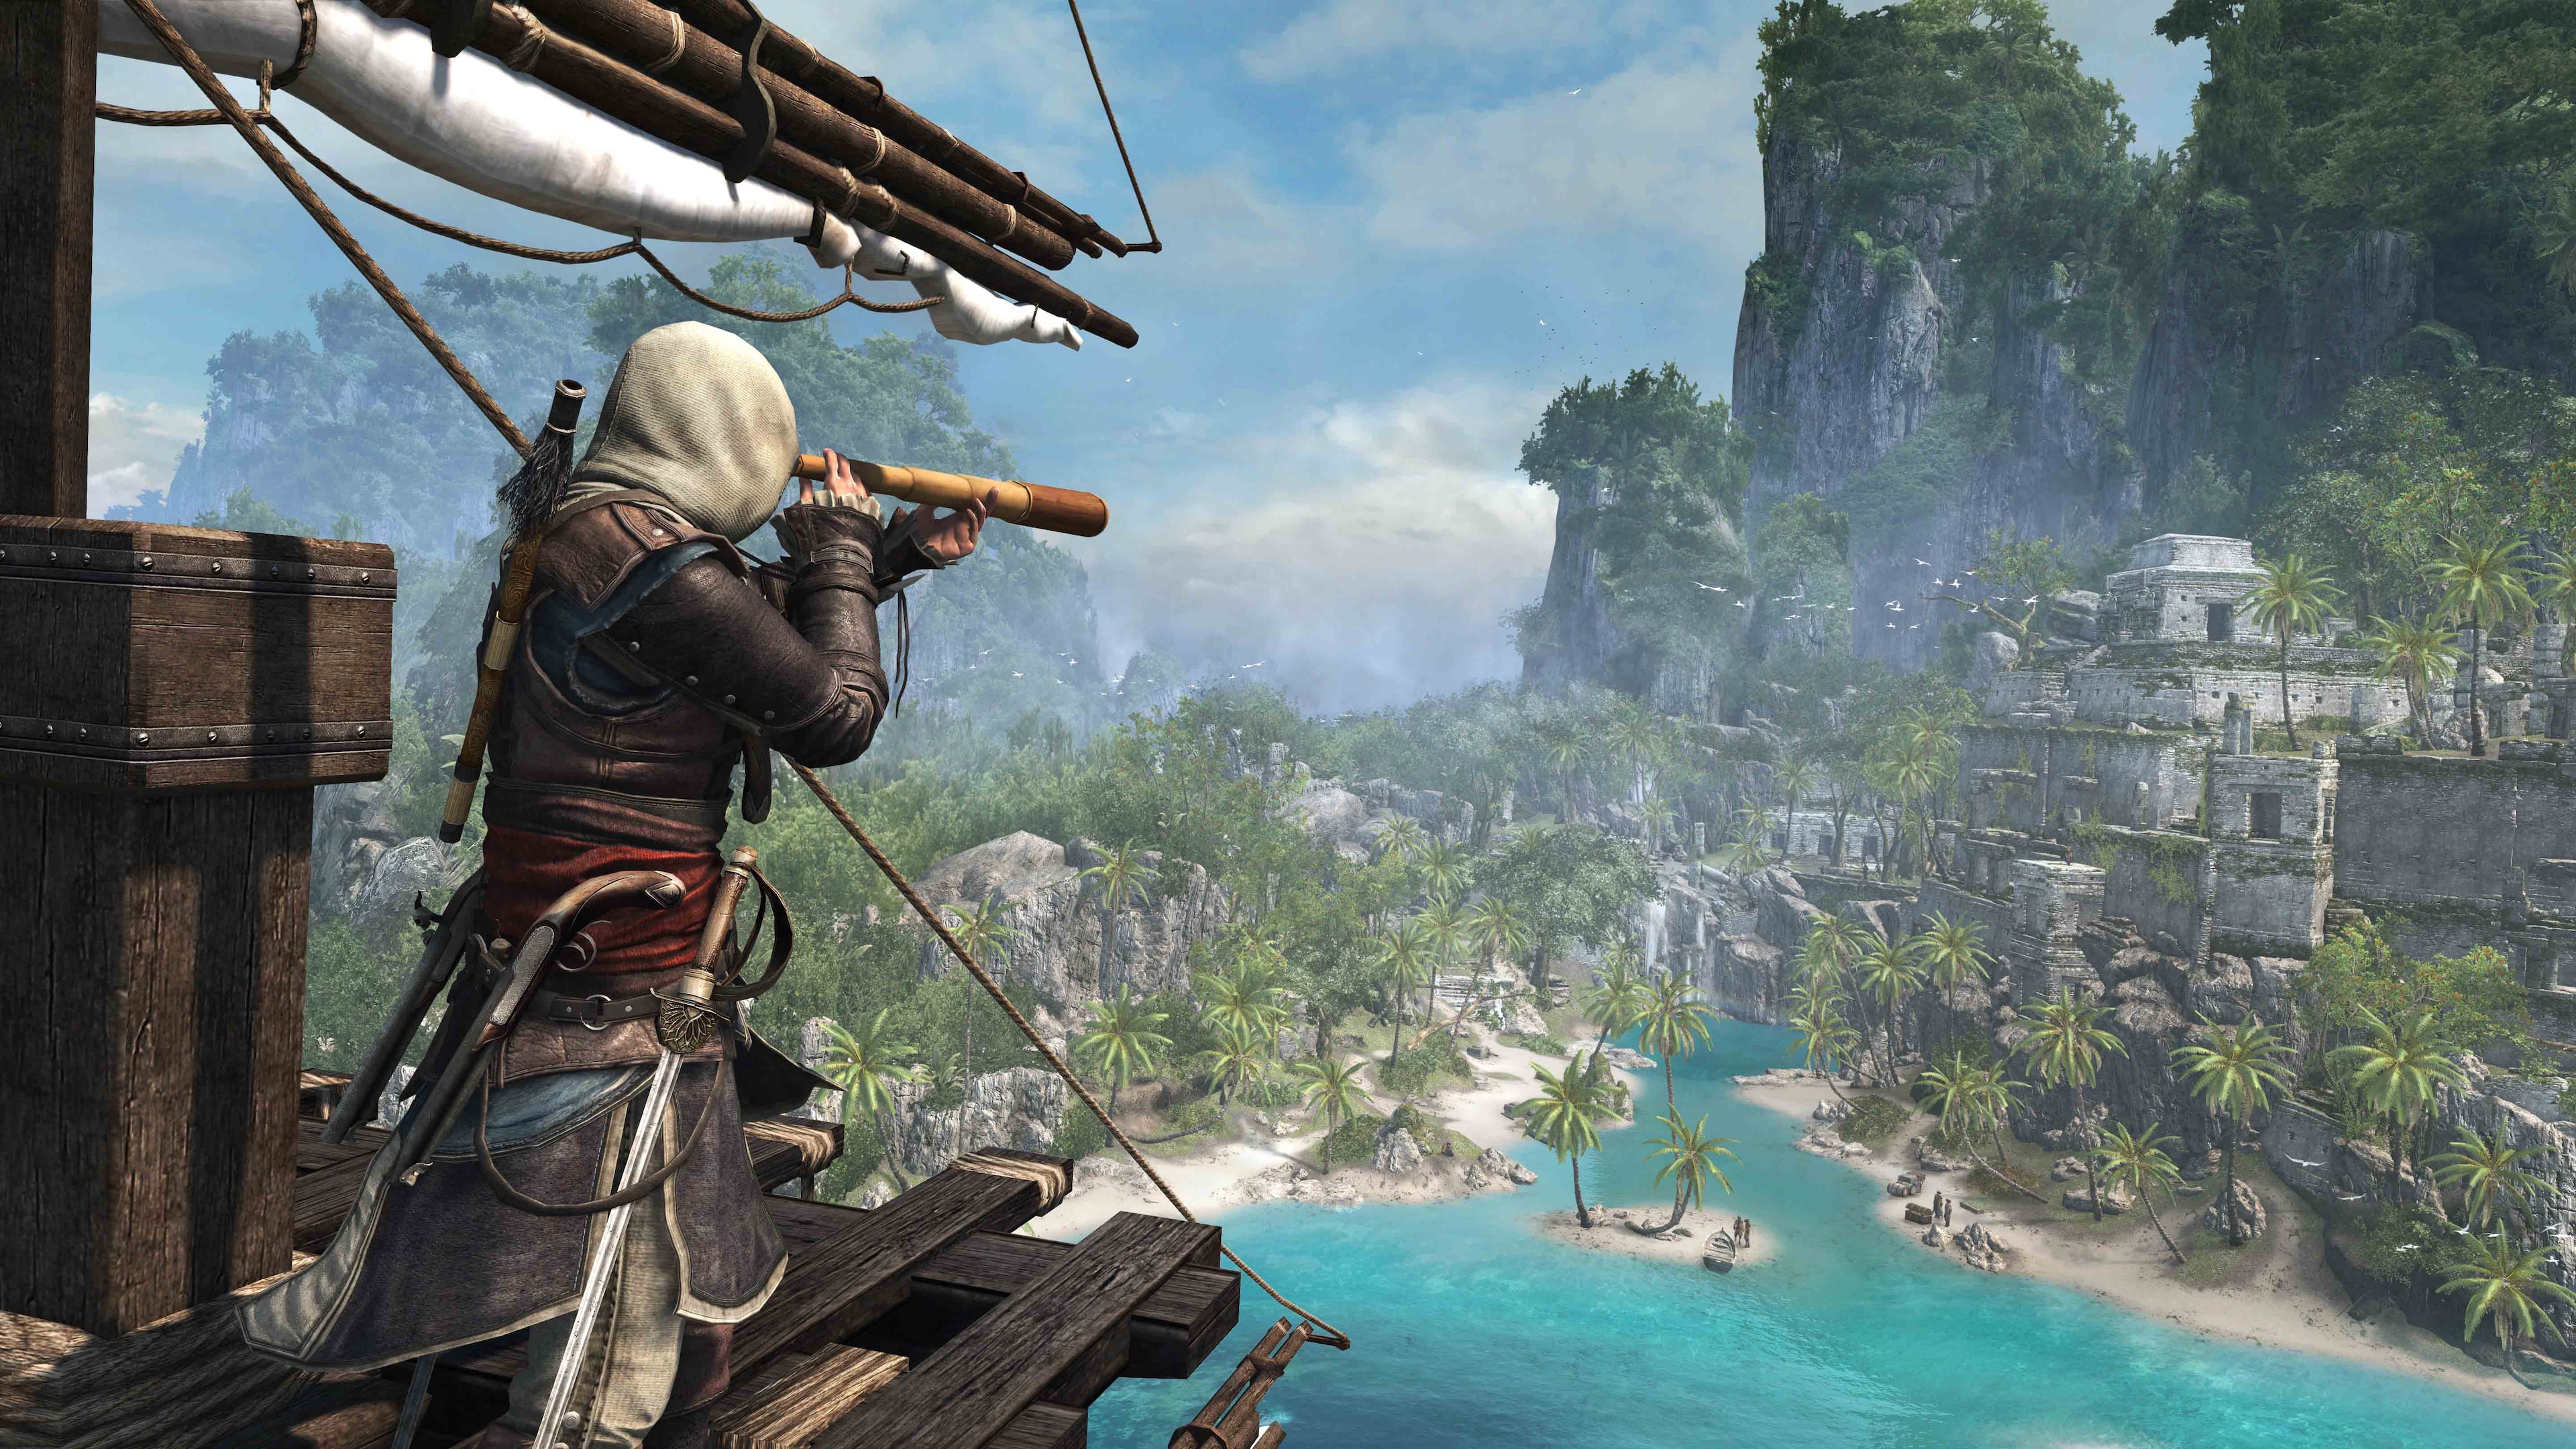 assassin's creed black flag playstation store